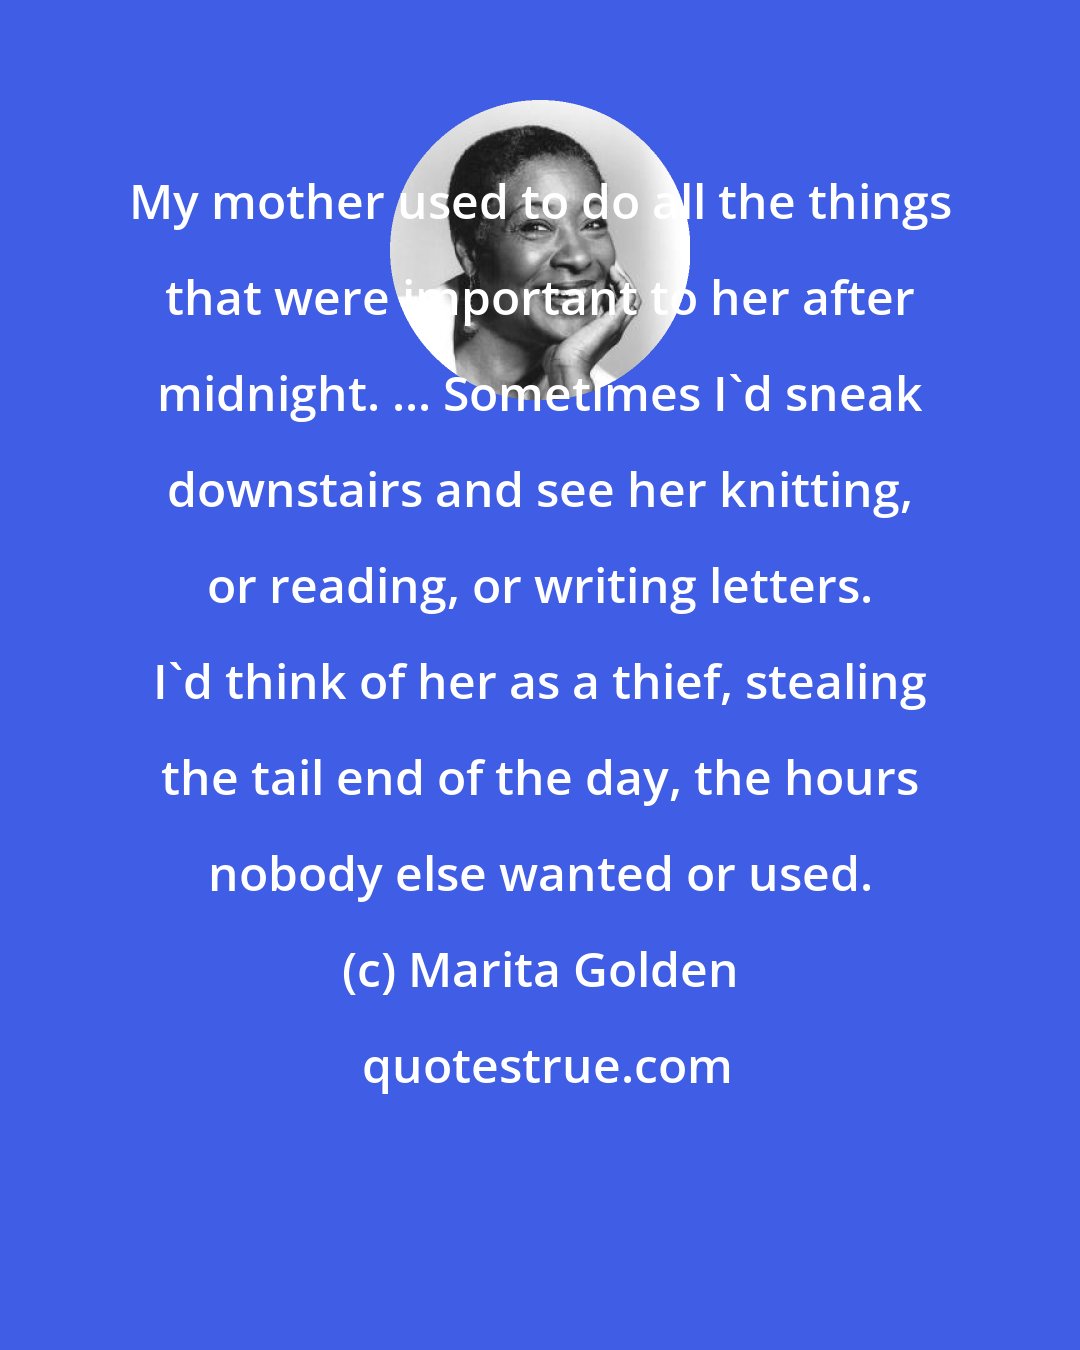 Marita Golden: My mother used to do all the things that were important to her after midnight. ... Sometimes I'd sneak downstairs and see her knitting, or reading, or writing letters. I'd think of her as a thief, stealing the tail end of the day, the hours nobody else wanted or used.